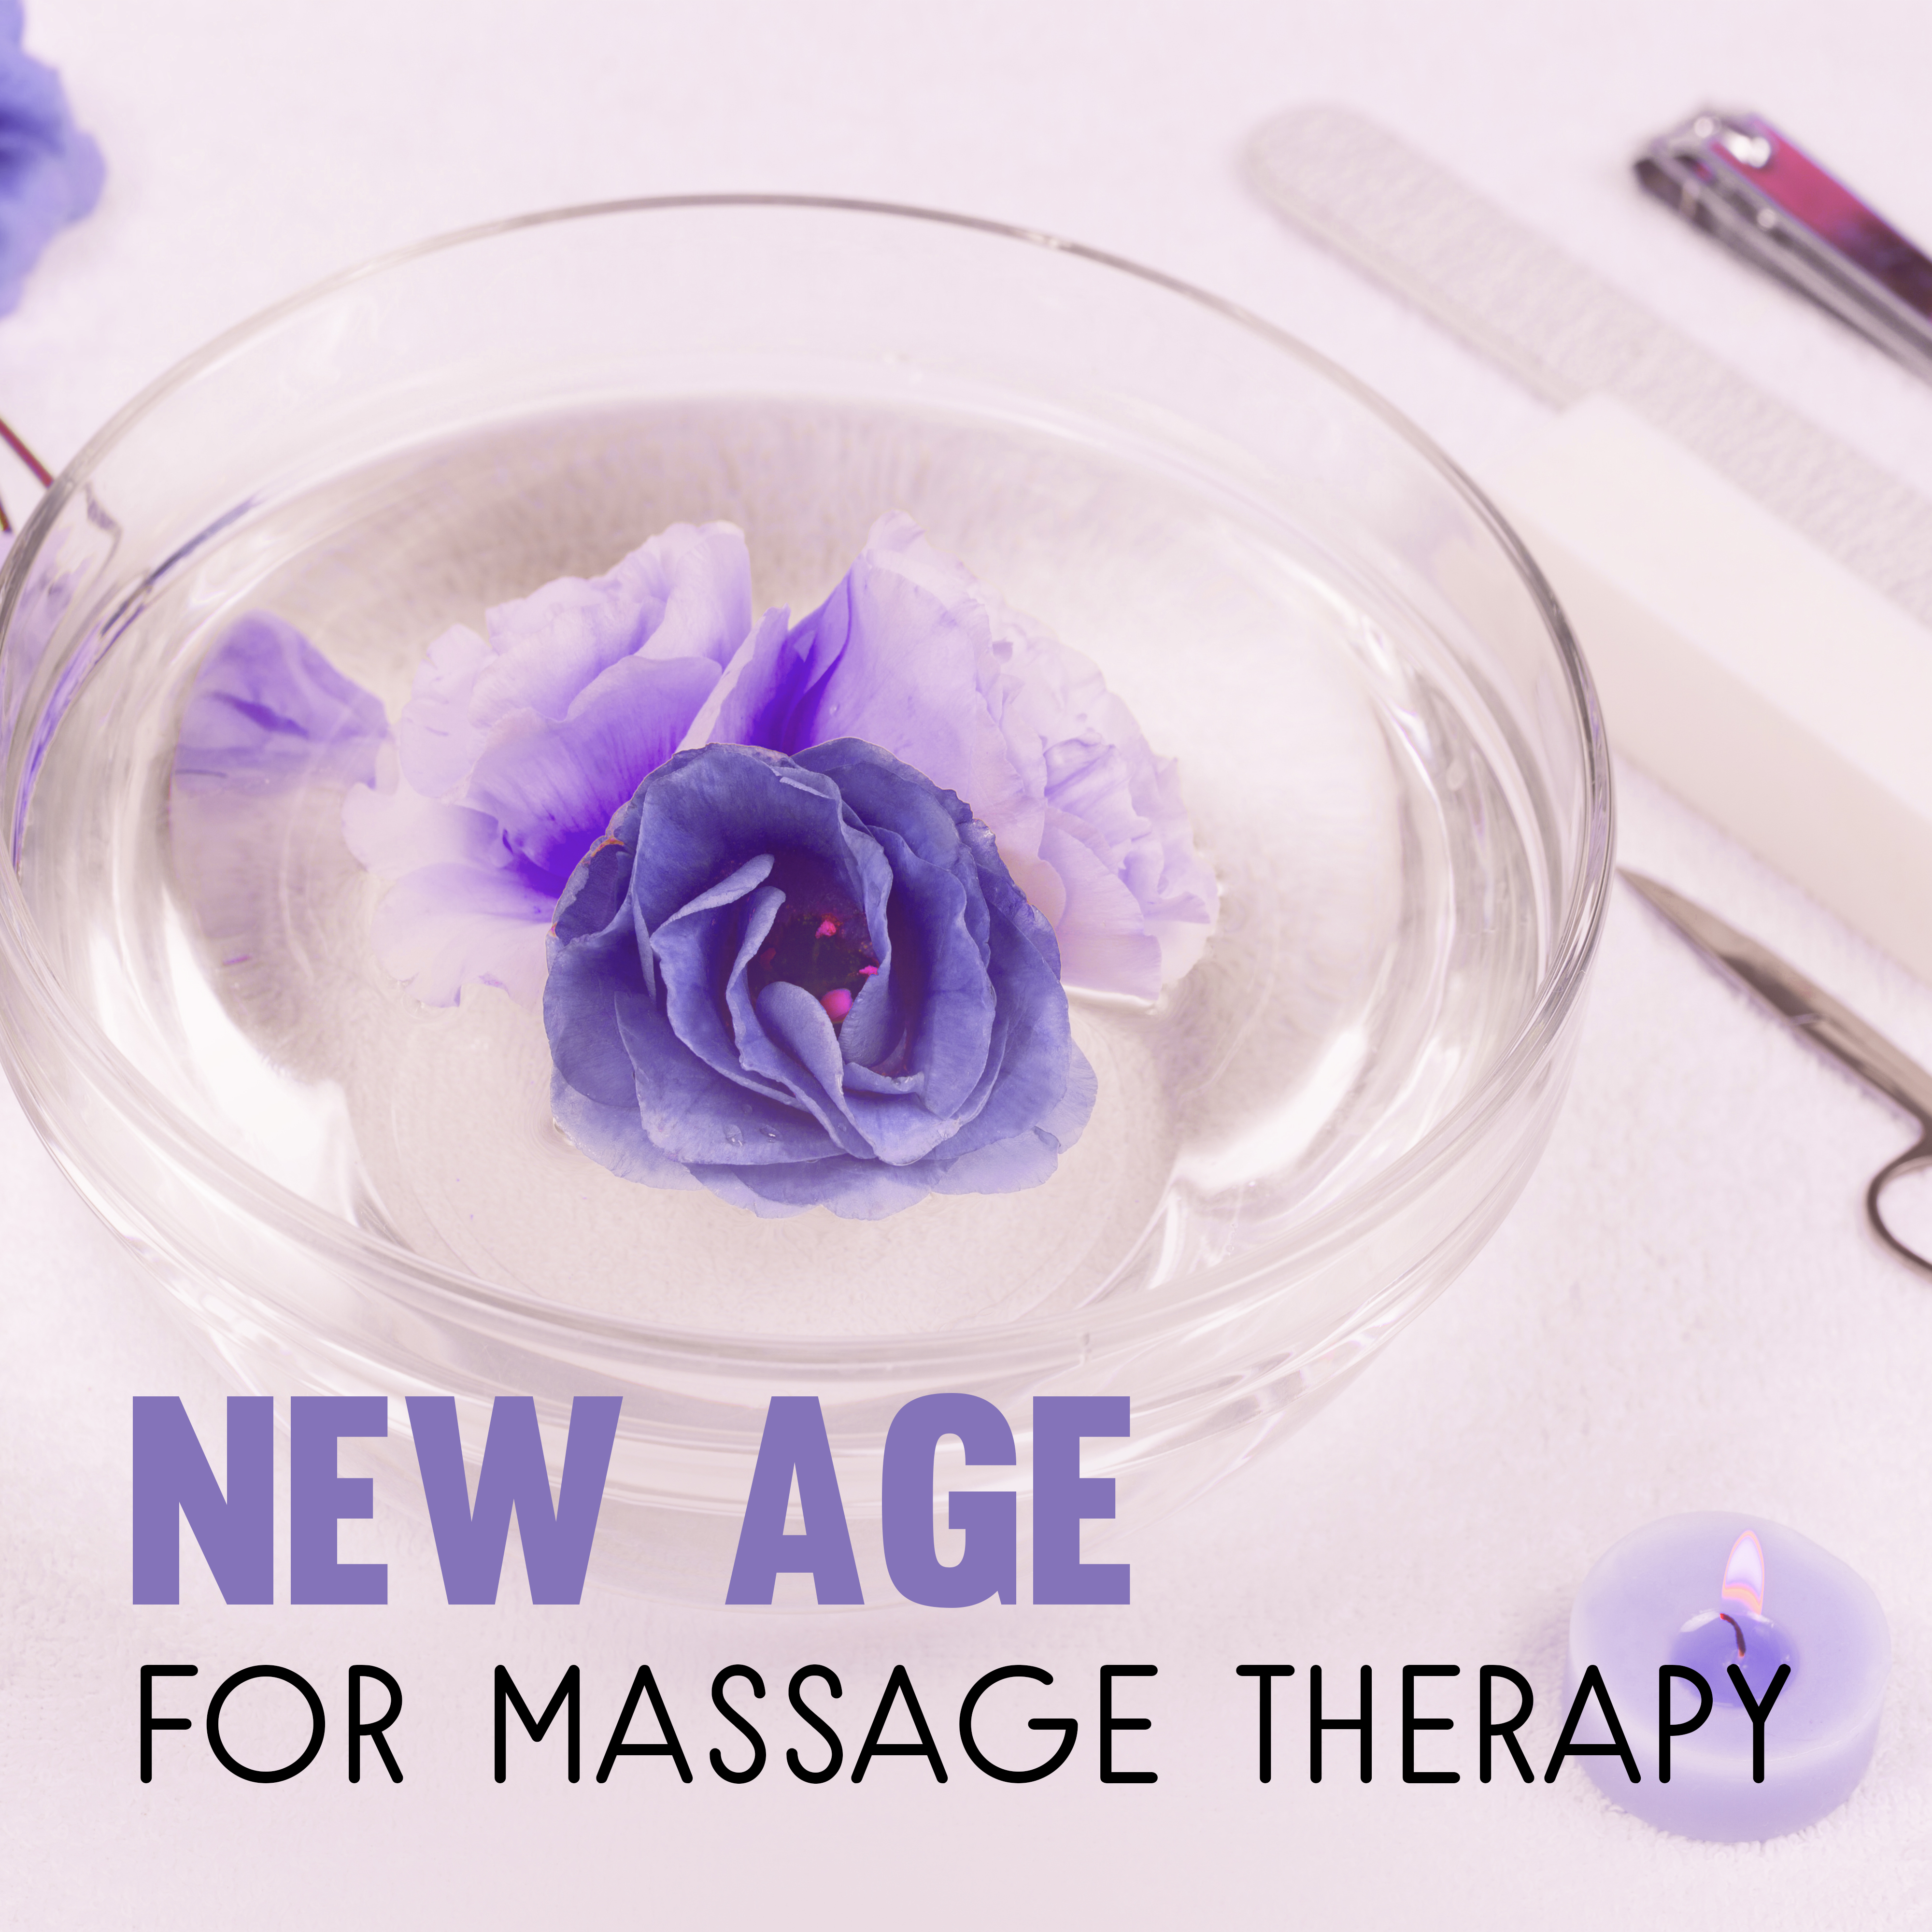 New Age for Massage Therapy  Zen Sensations , Relaxation Spa, Beauty Lounge, Deep Sounds of Nature, Pure Therapy Music